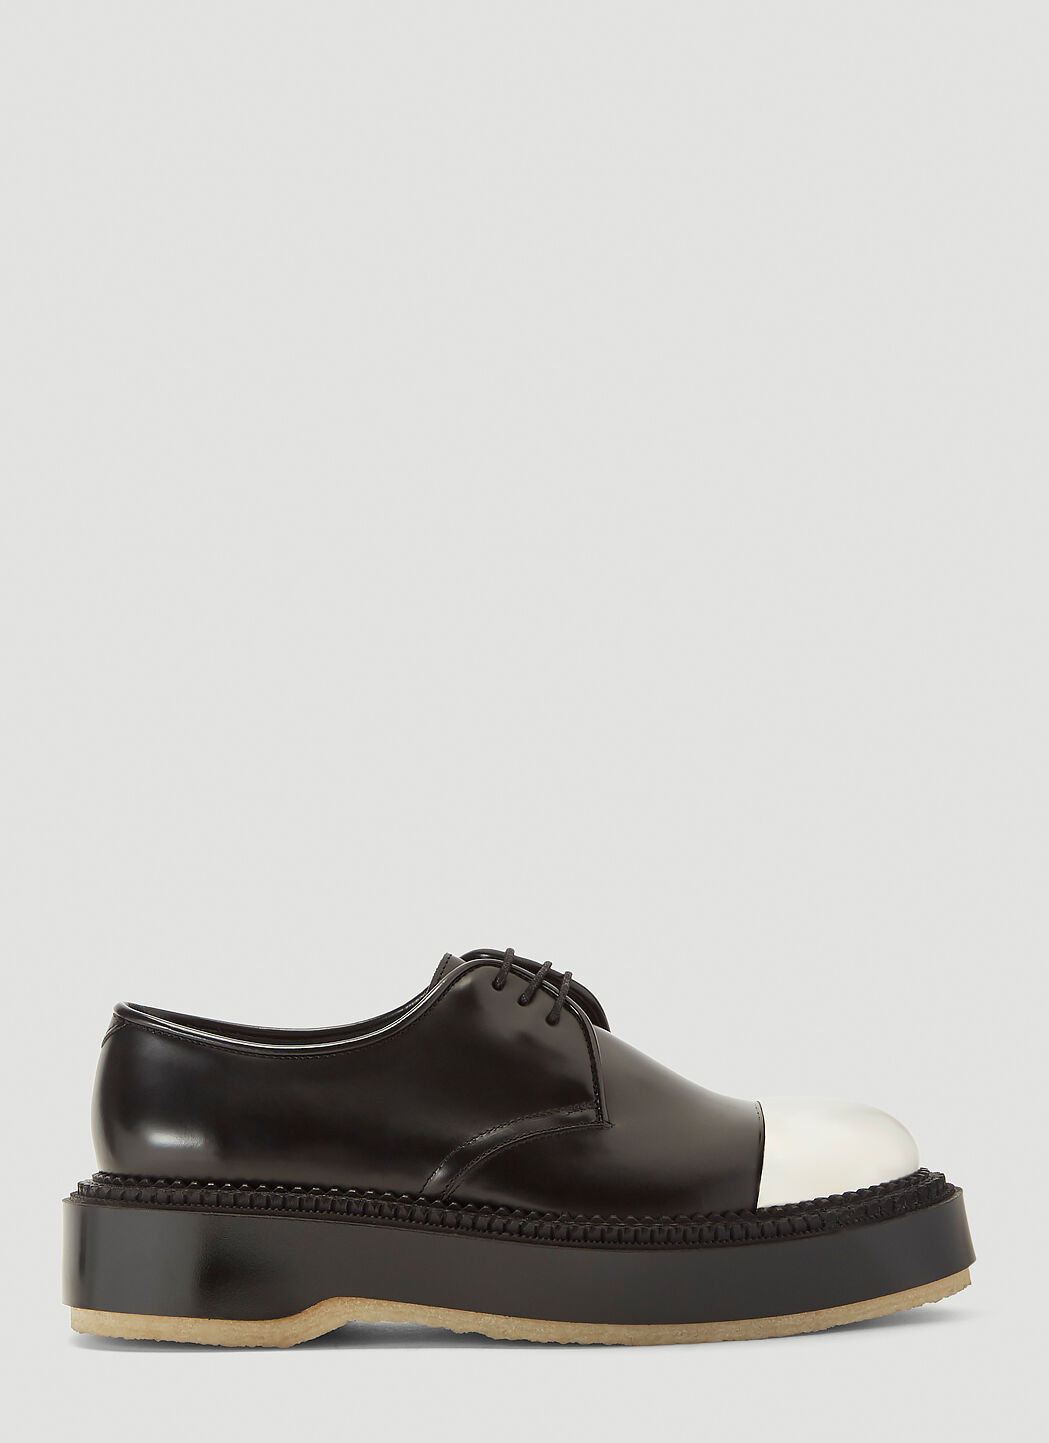 X Undercover Type 54C Metal Derby Shoes